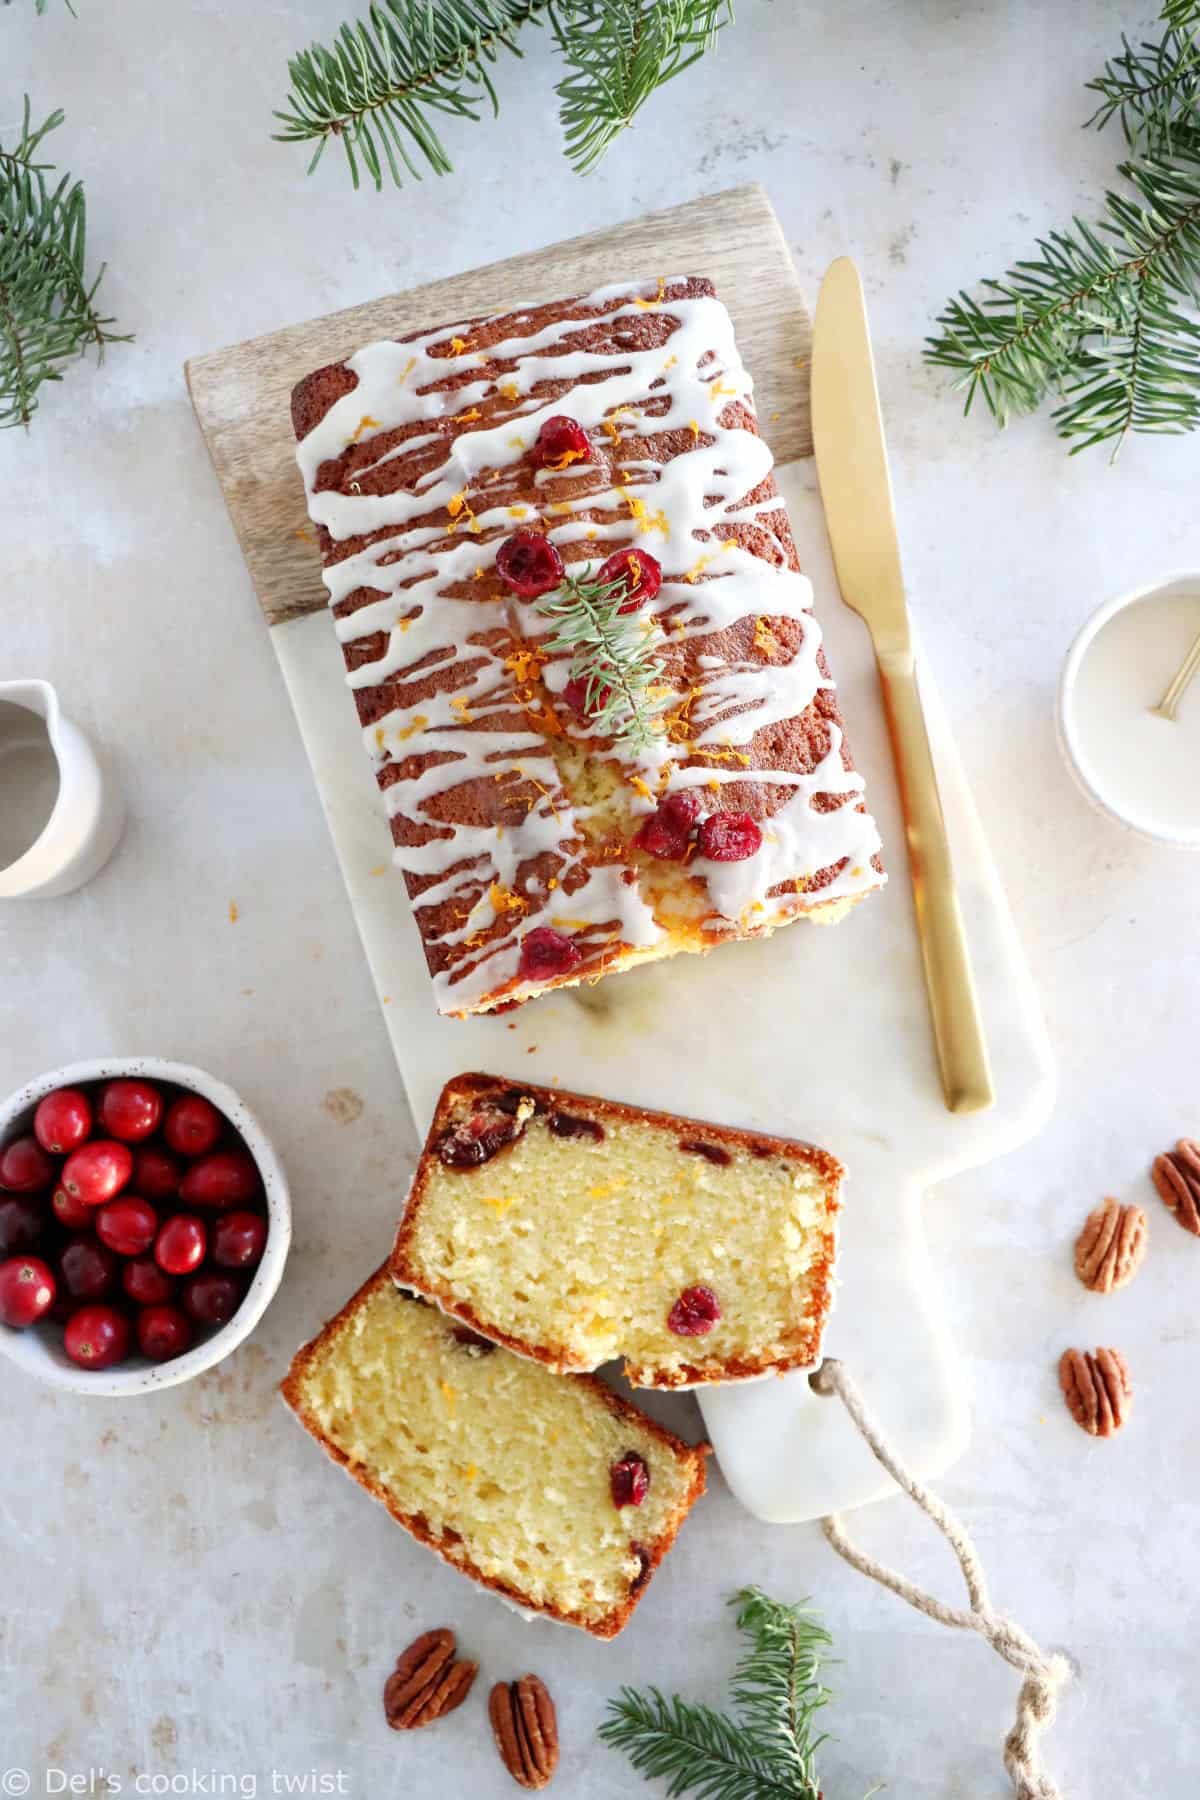 This easy orange cranberry pound cake is rich, buttery, subtly flavored with orange and loaded with dried cranberries.